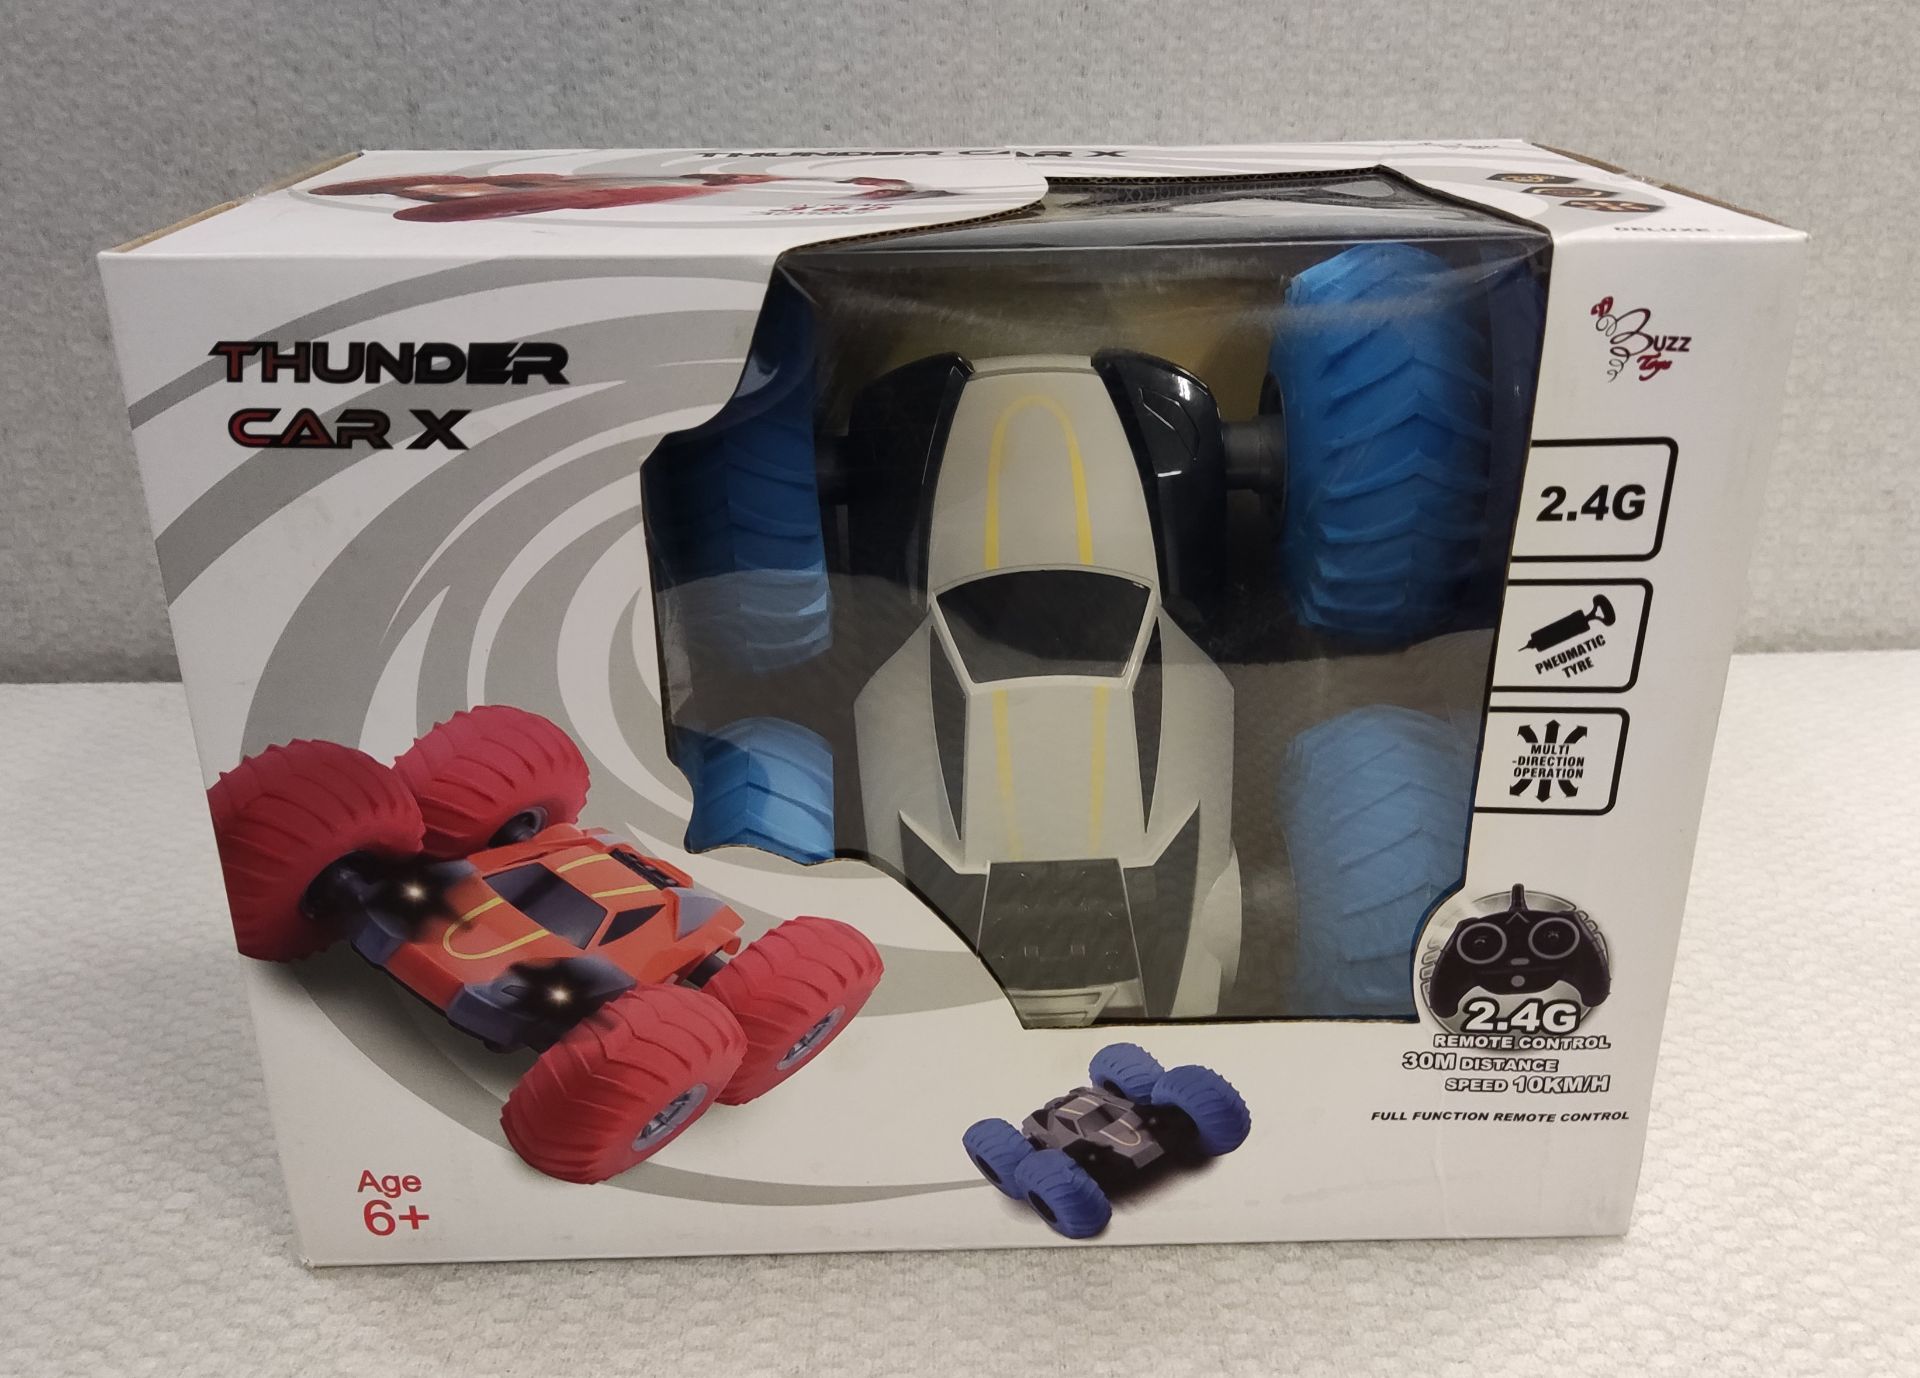 1 x Buzz Toys Thunder Car X R/C Vehicle In White/Blue - New/Boxed - Image 2 of 9